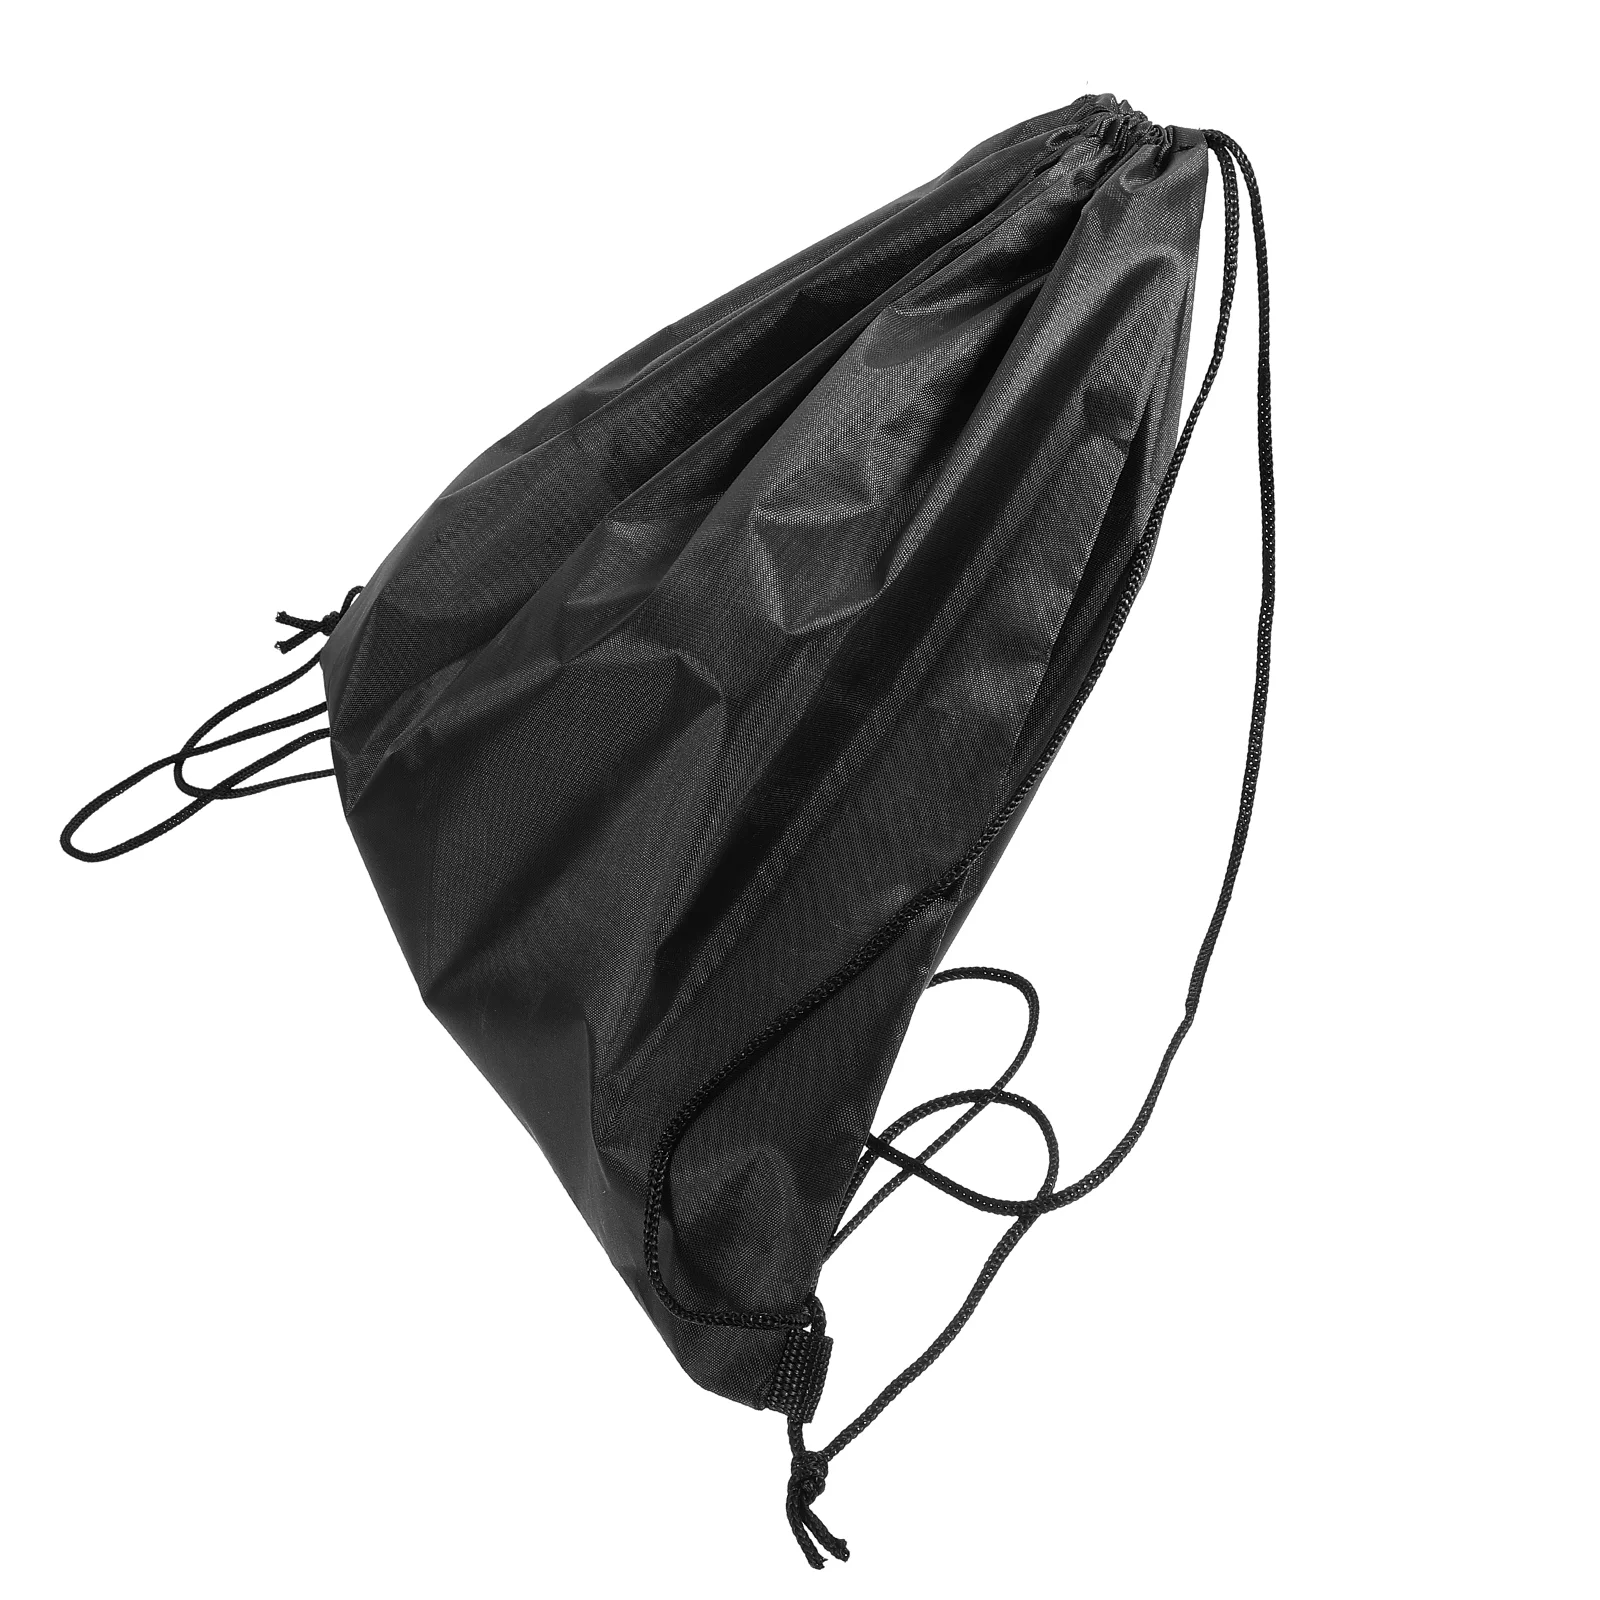 Portable Bag Drawstring Pouch Outdoor Motorcycle Storage Bag outdoor phone bag passport holder organizers waist bag card storage bag belt pouch invisible wallet